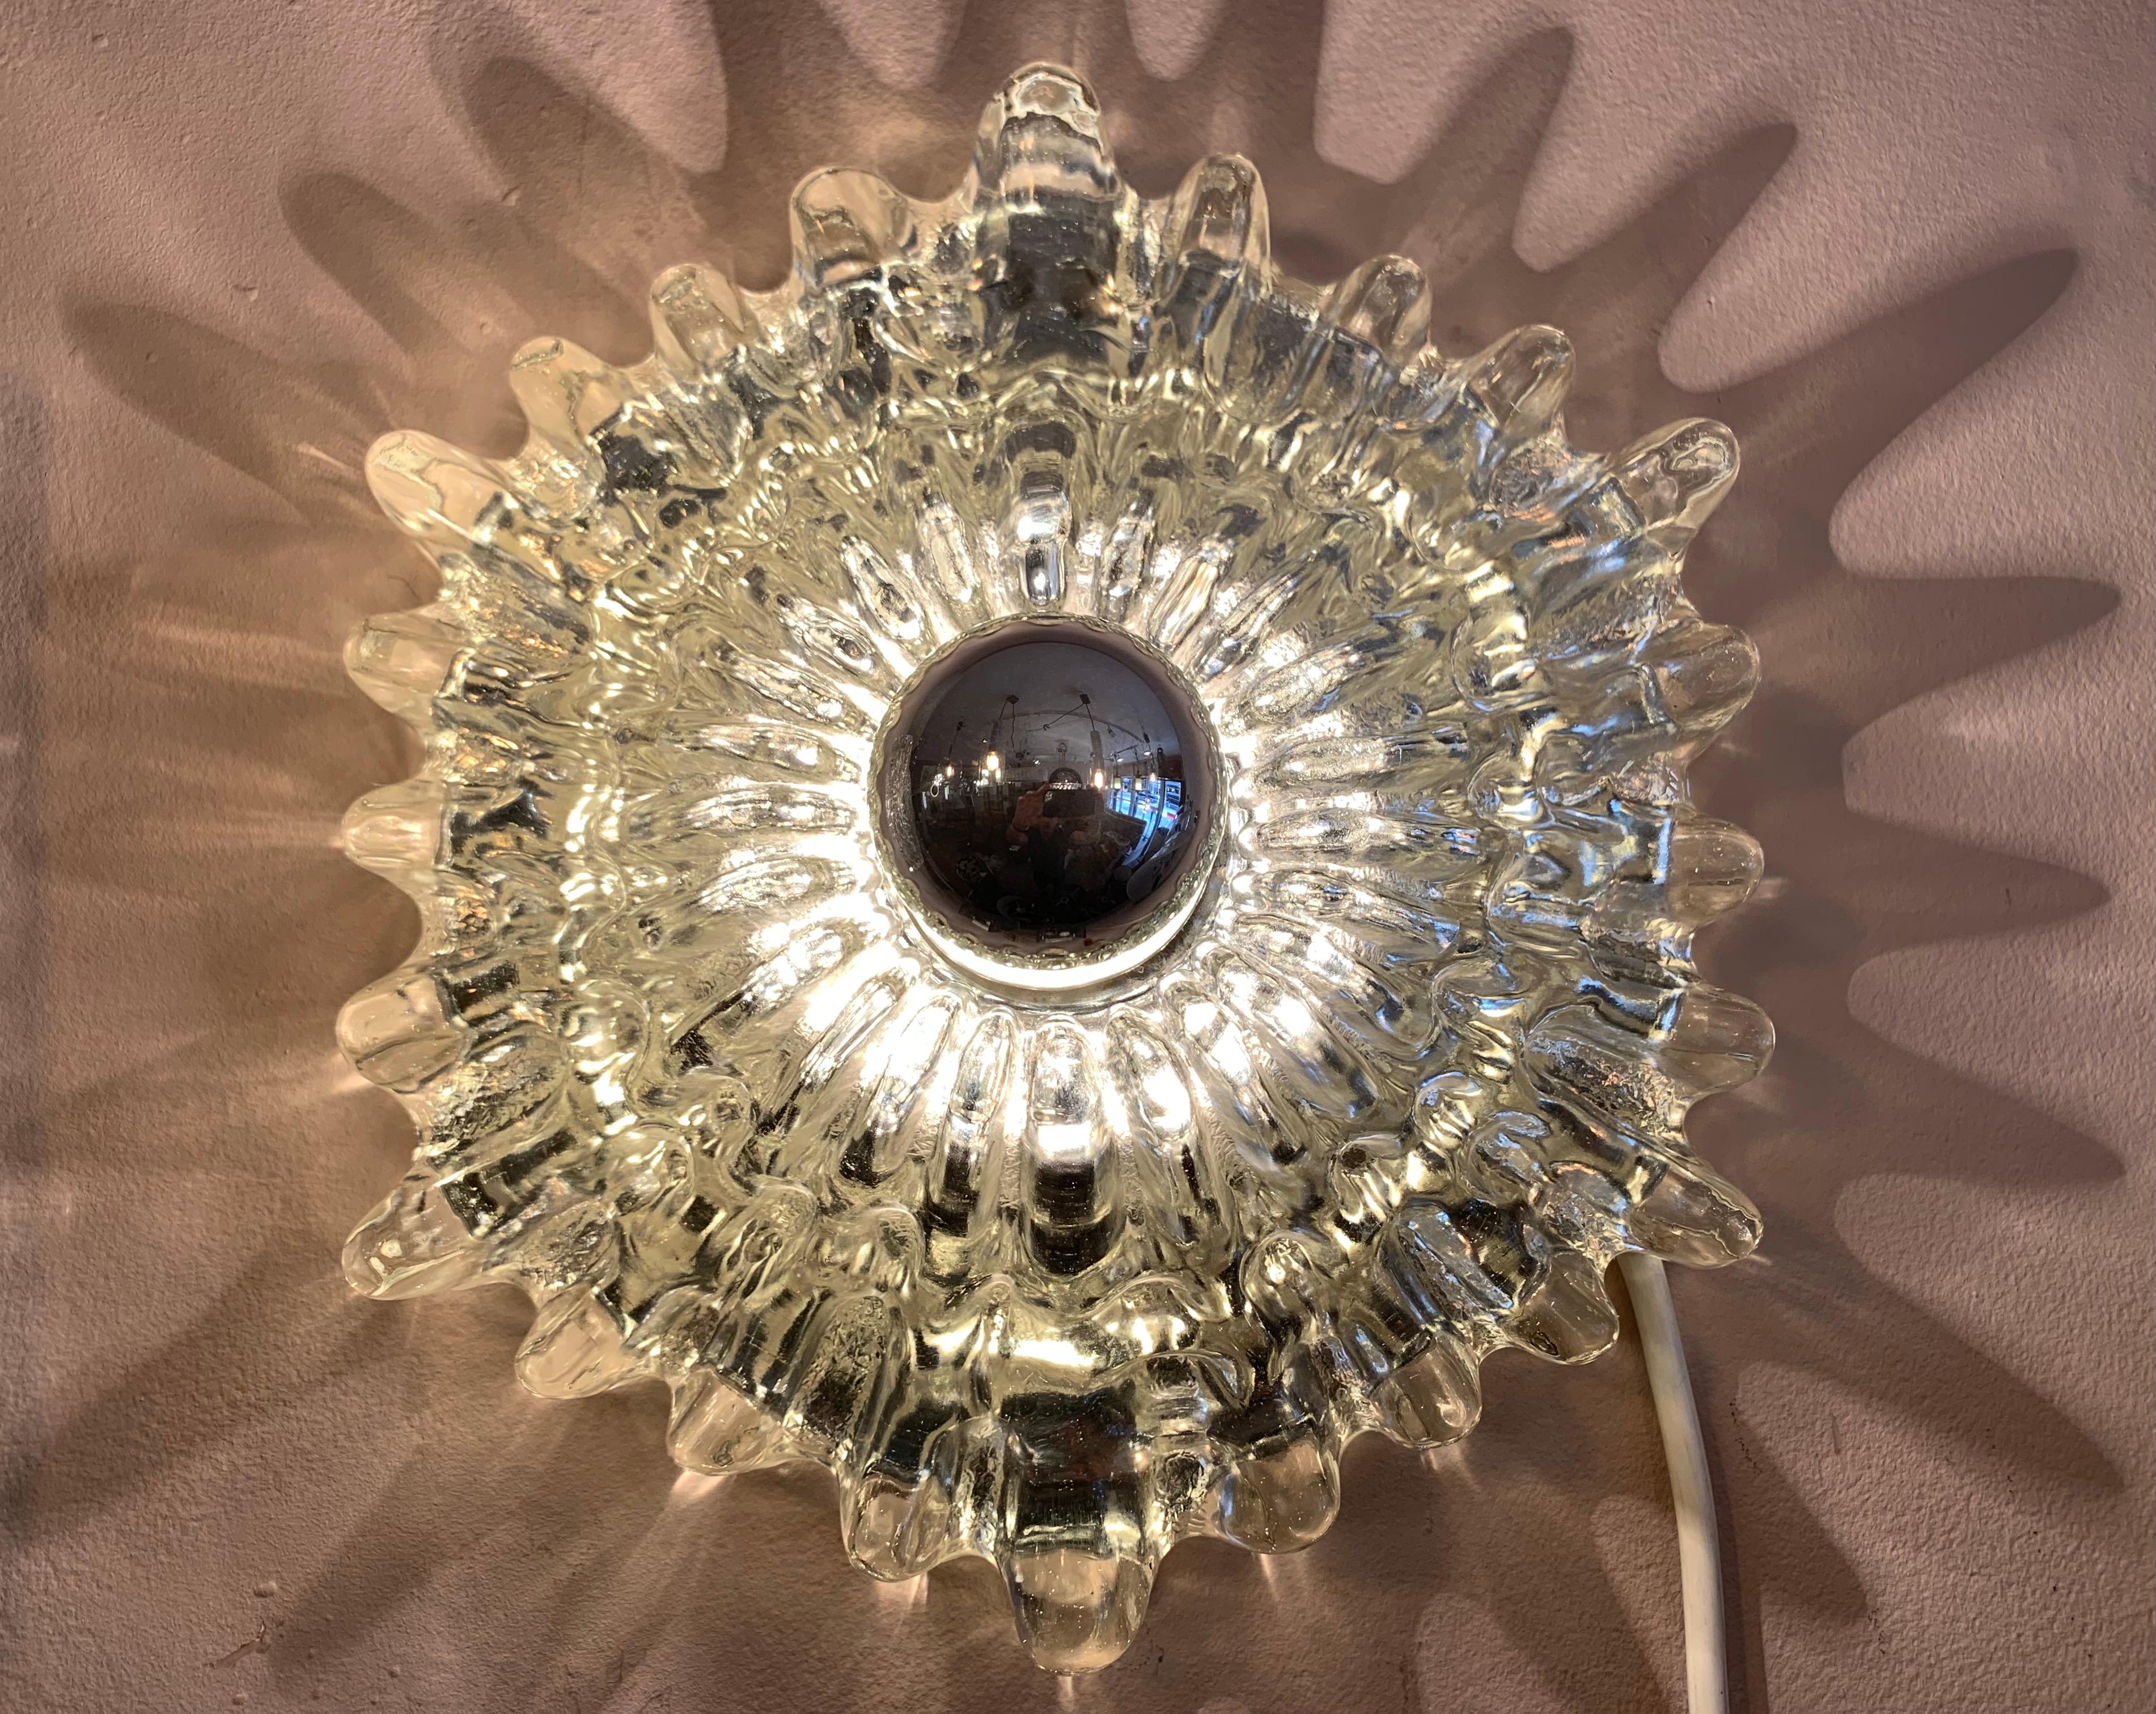 1960s/1970s German Hillebrand Leuchten hexagonal, textured, clear and silver glass wall light or wall sconce which could even be used as ceiling flush mounts. The thick glass is heavy with a deep textured sunburst shaped pattern. A single E26/E27